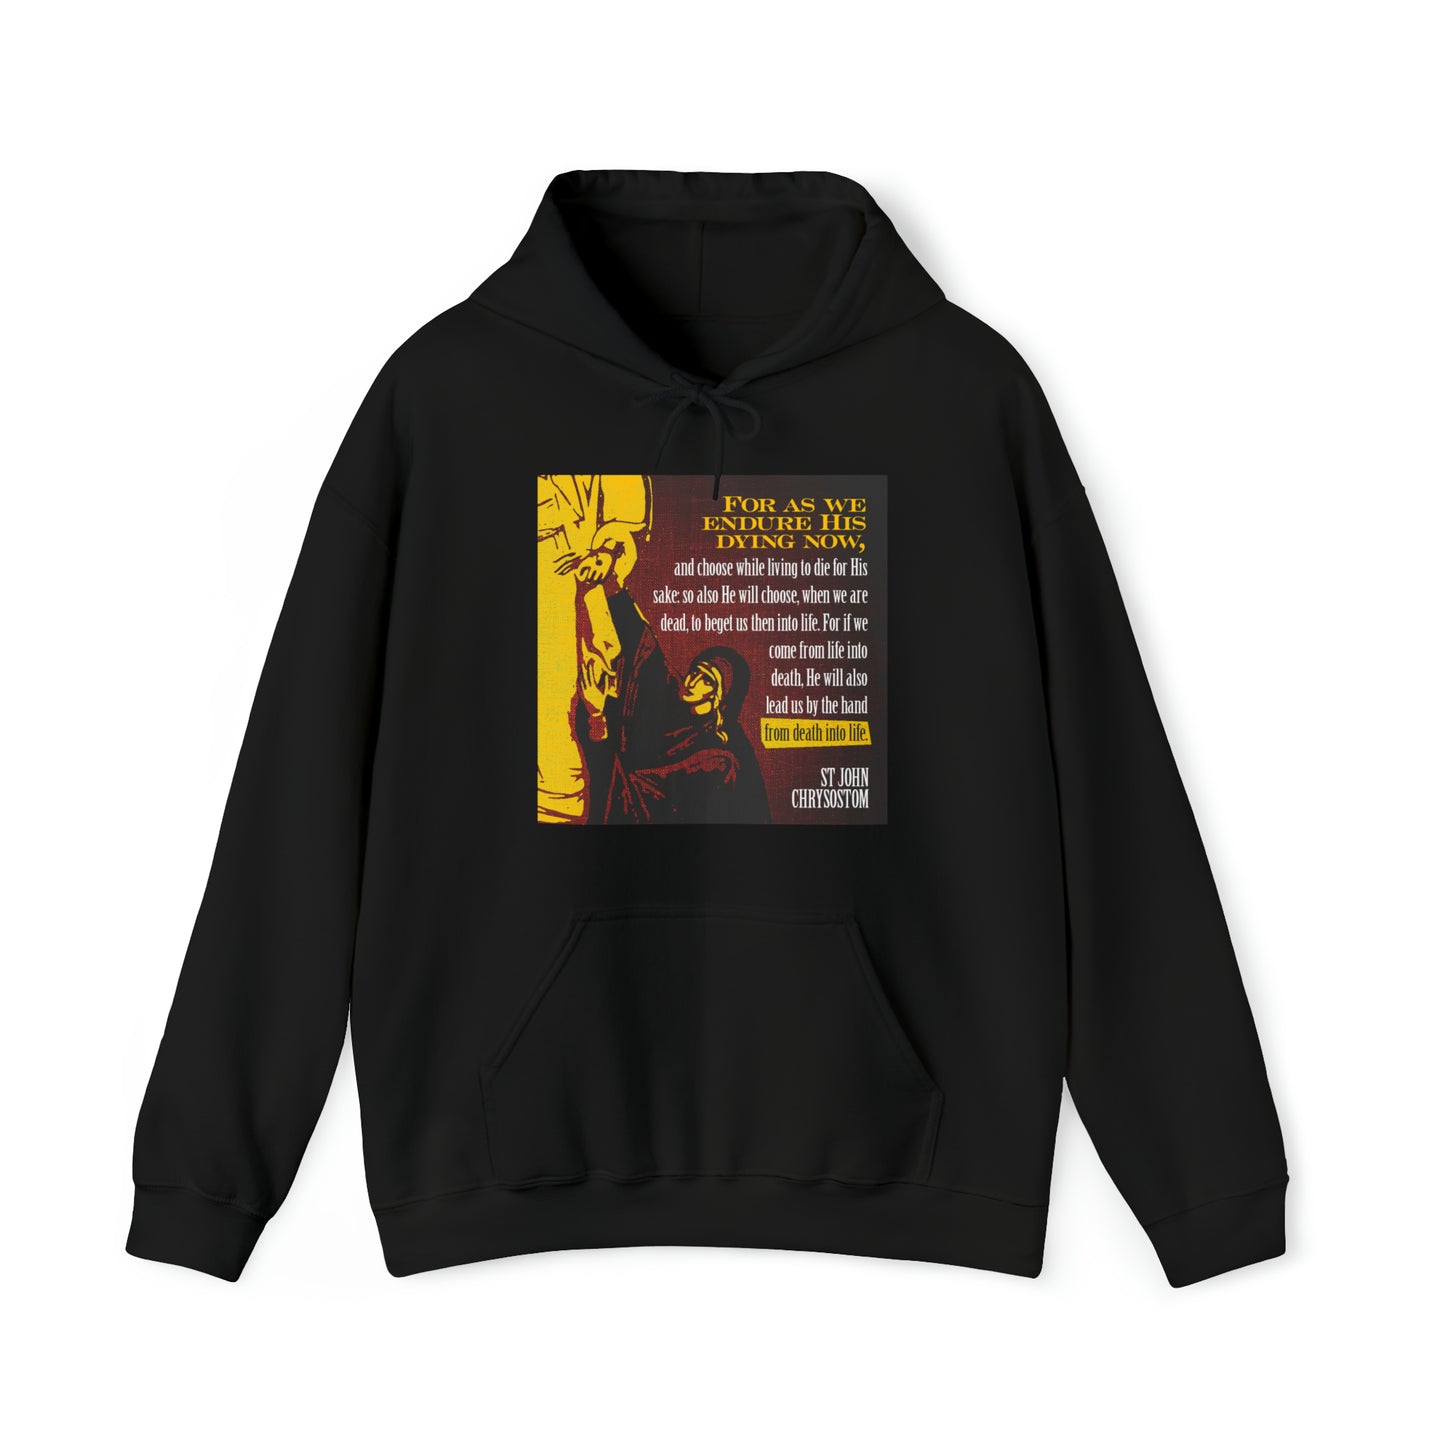 He Will Lead Us by the Hand from Death Into Life No. 1 | Orthodox Christian Hoodie / Hooded Sweatshirt